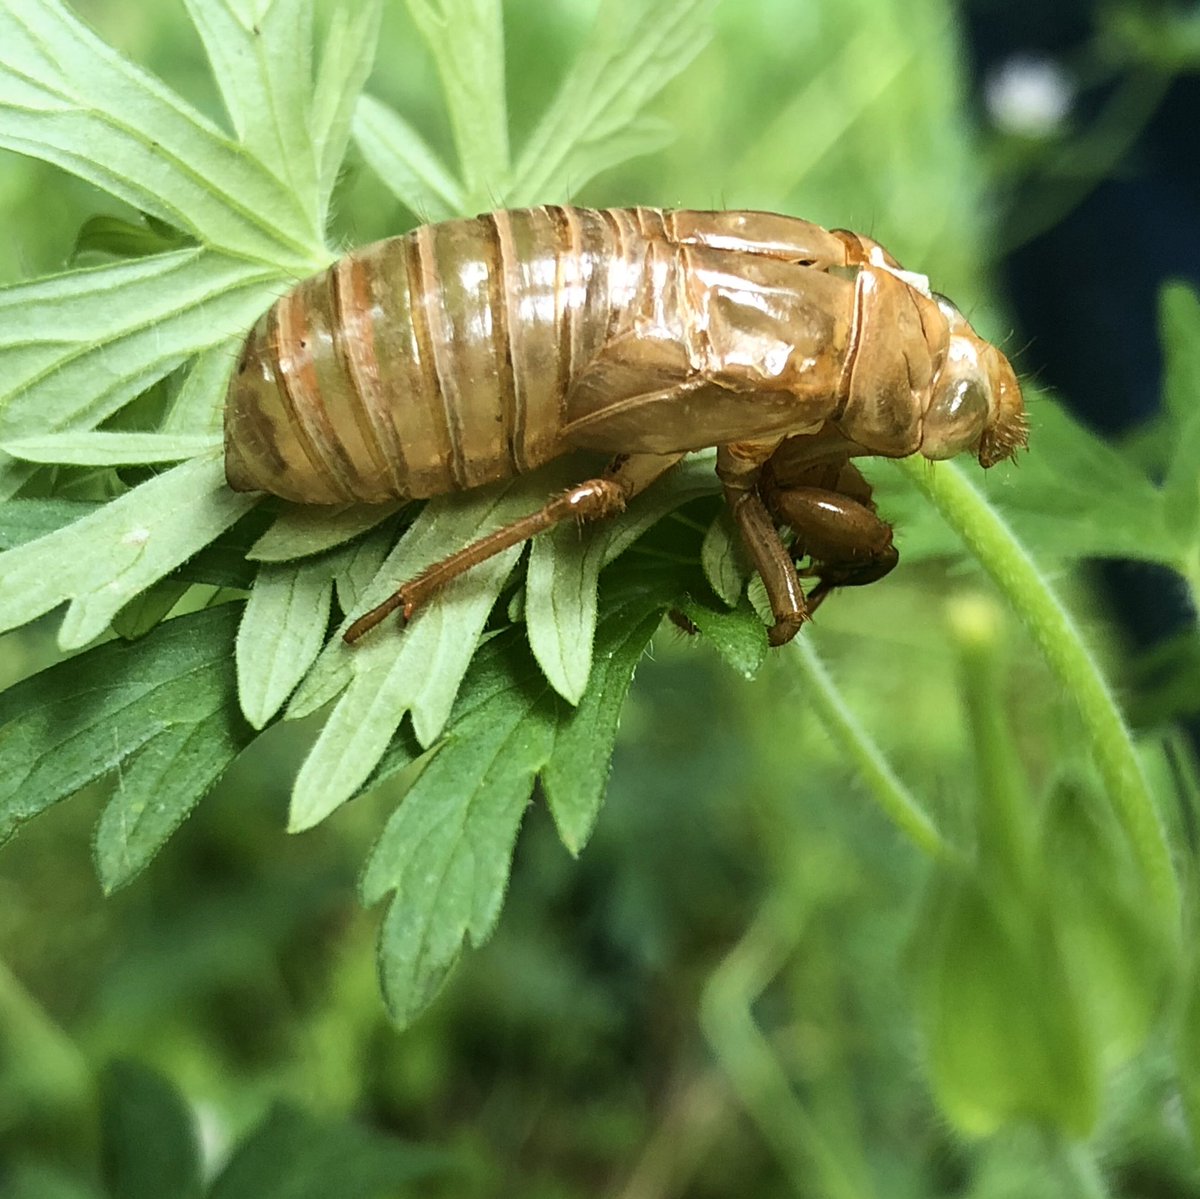 My goodness! What a marvelously buggy day in the garden! Check out this spectacular cicada molt!